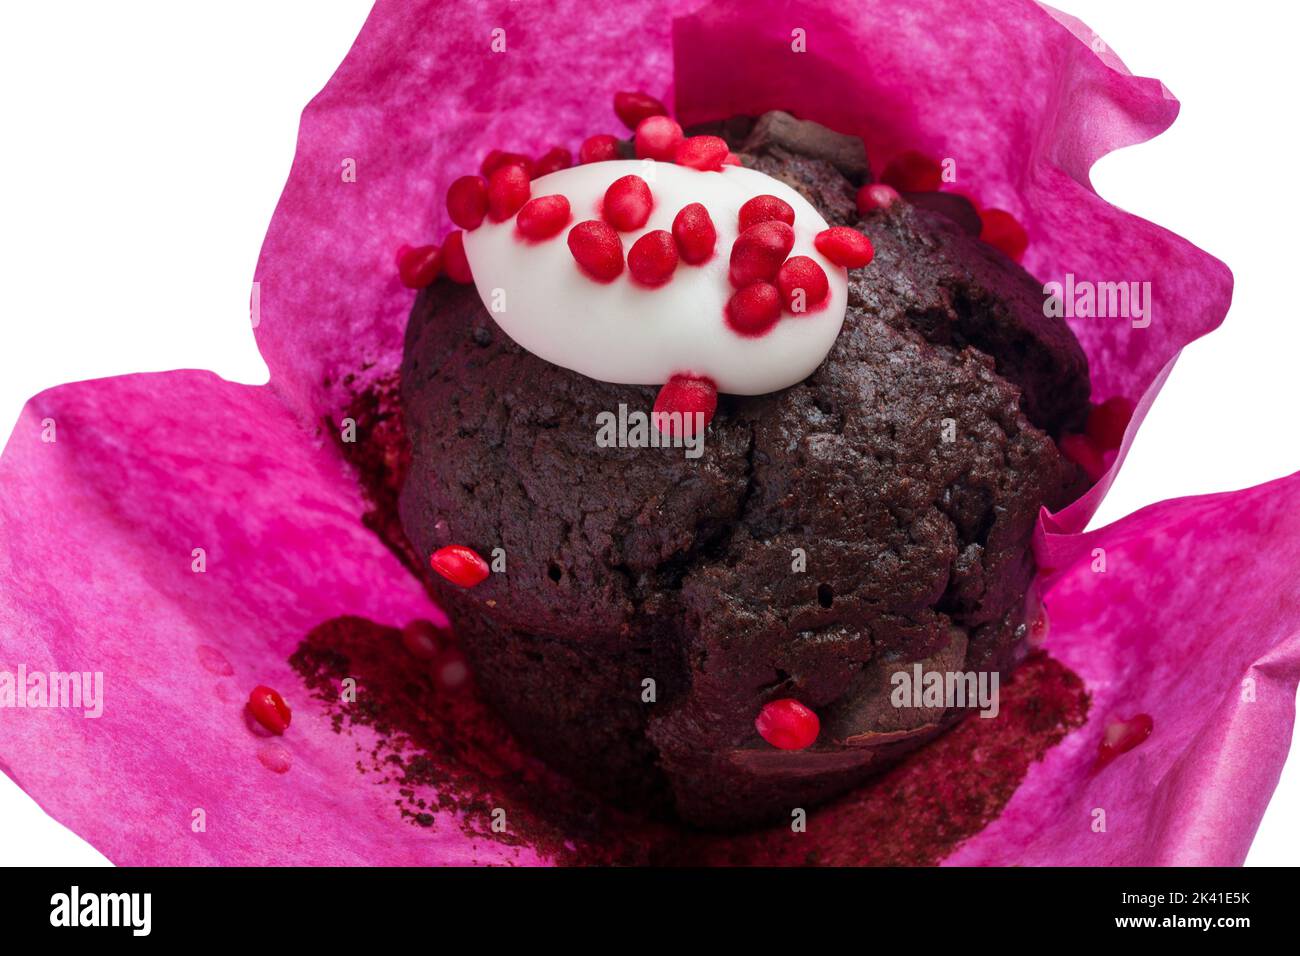 Black Forest Muffin by Sainsbury's from Sainsbury's in-store bakery set on white background Stock Photo